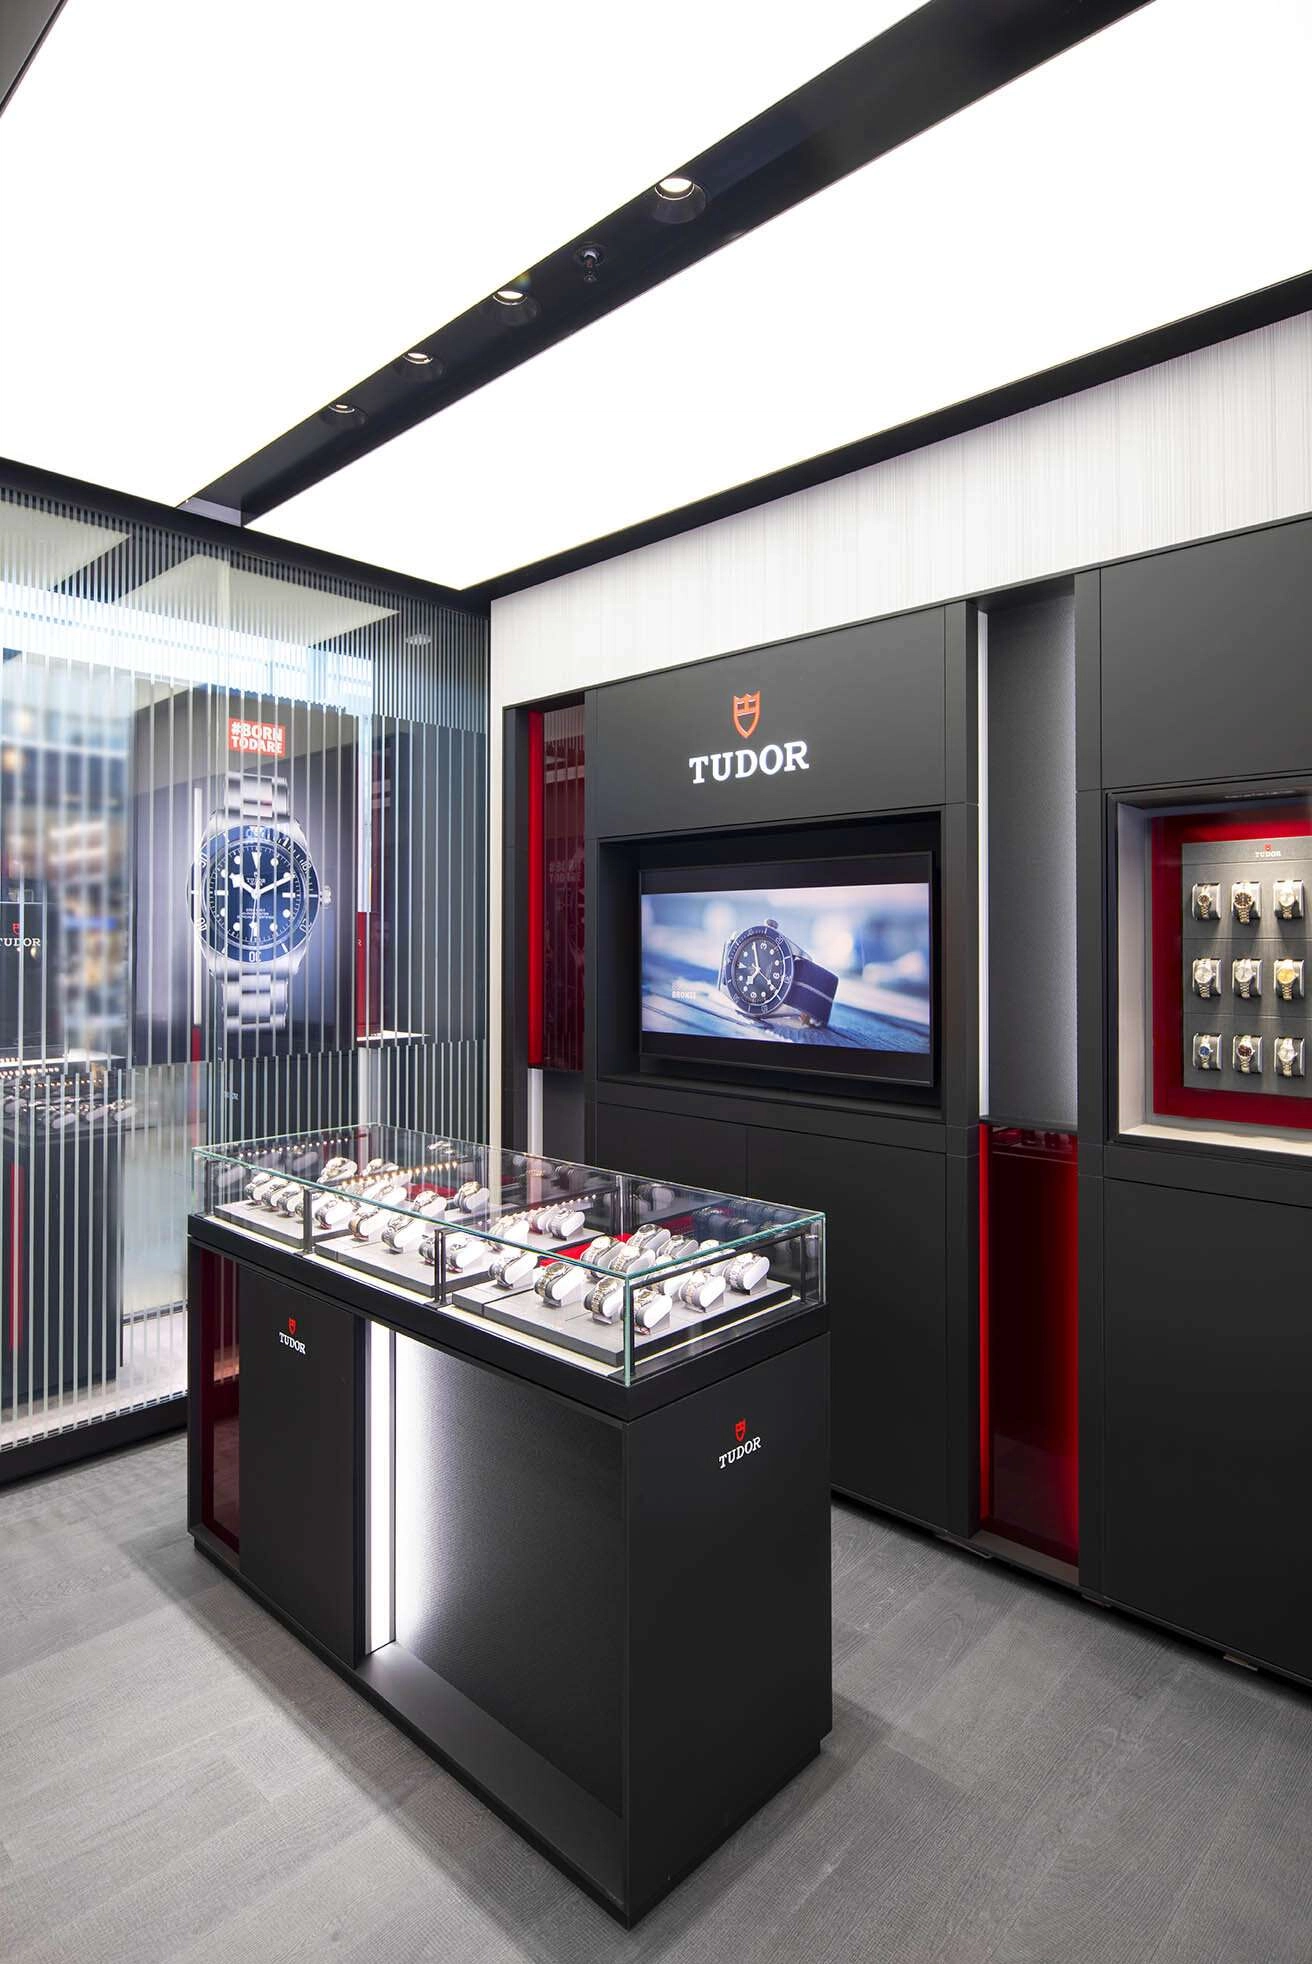 Architectural photography for a watch store